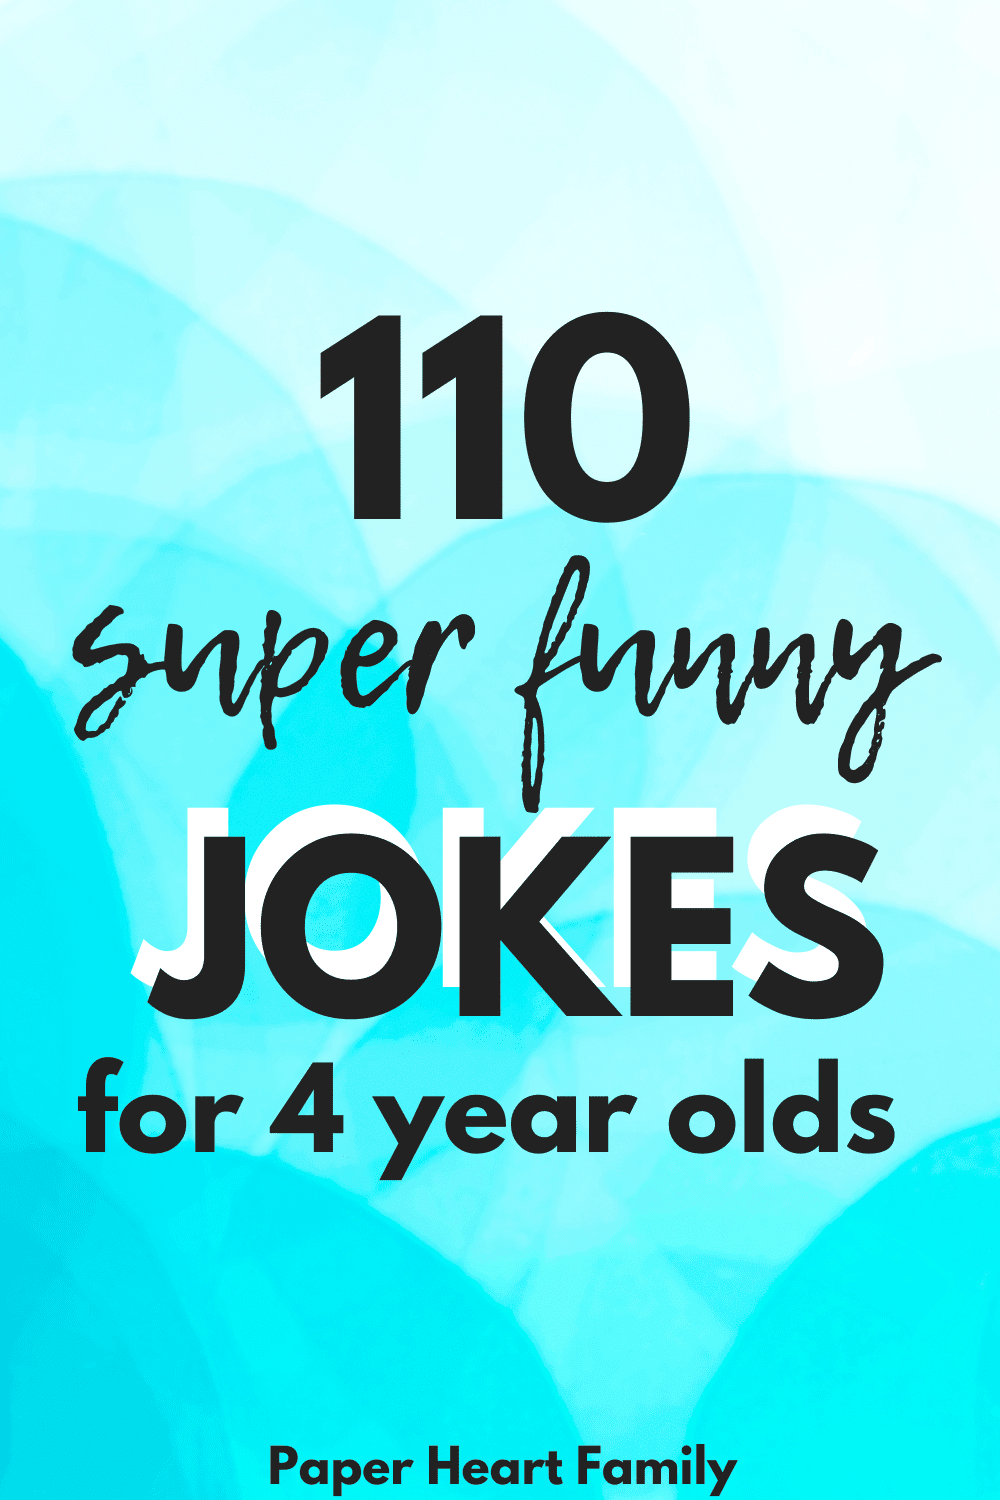 89 Incredibly Funny Jokes For 6-7 Year Olds